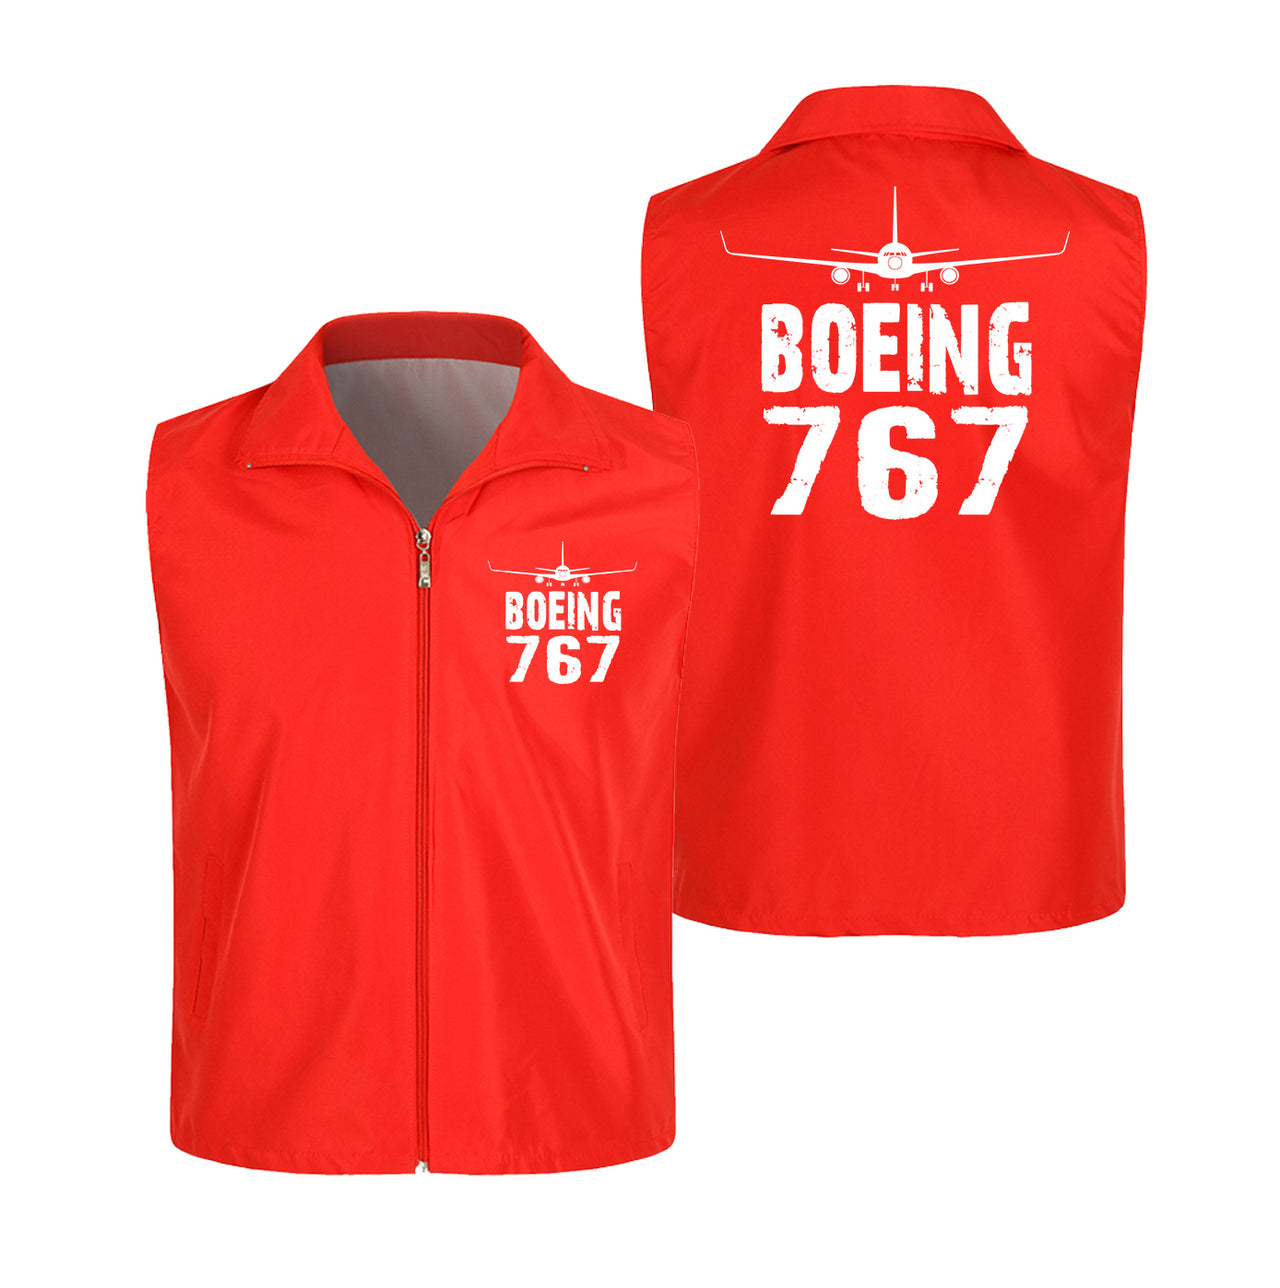 Boeing 767 & Plane Designed Thin Style Vests